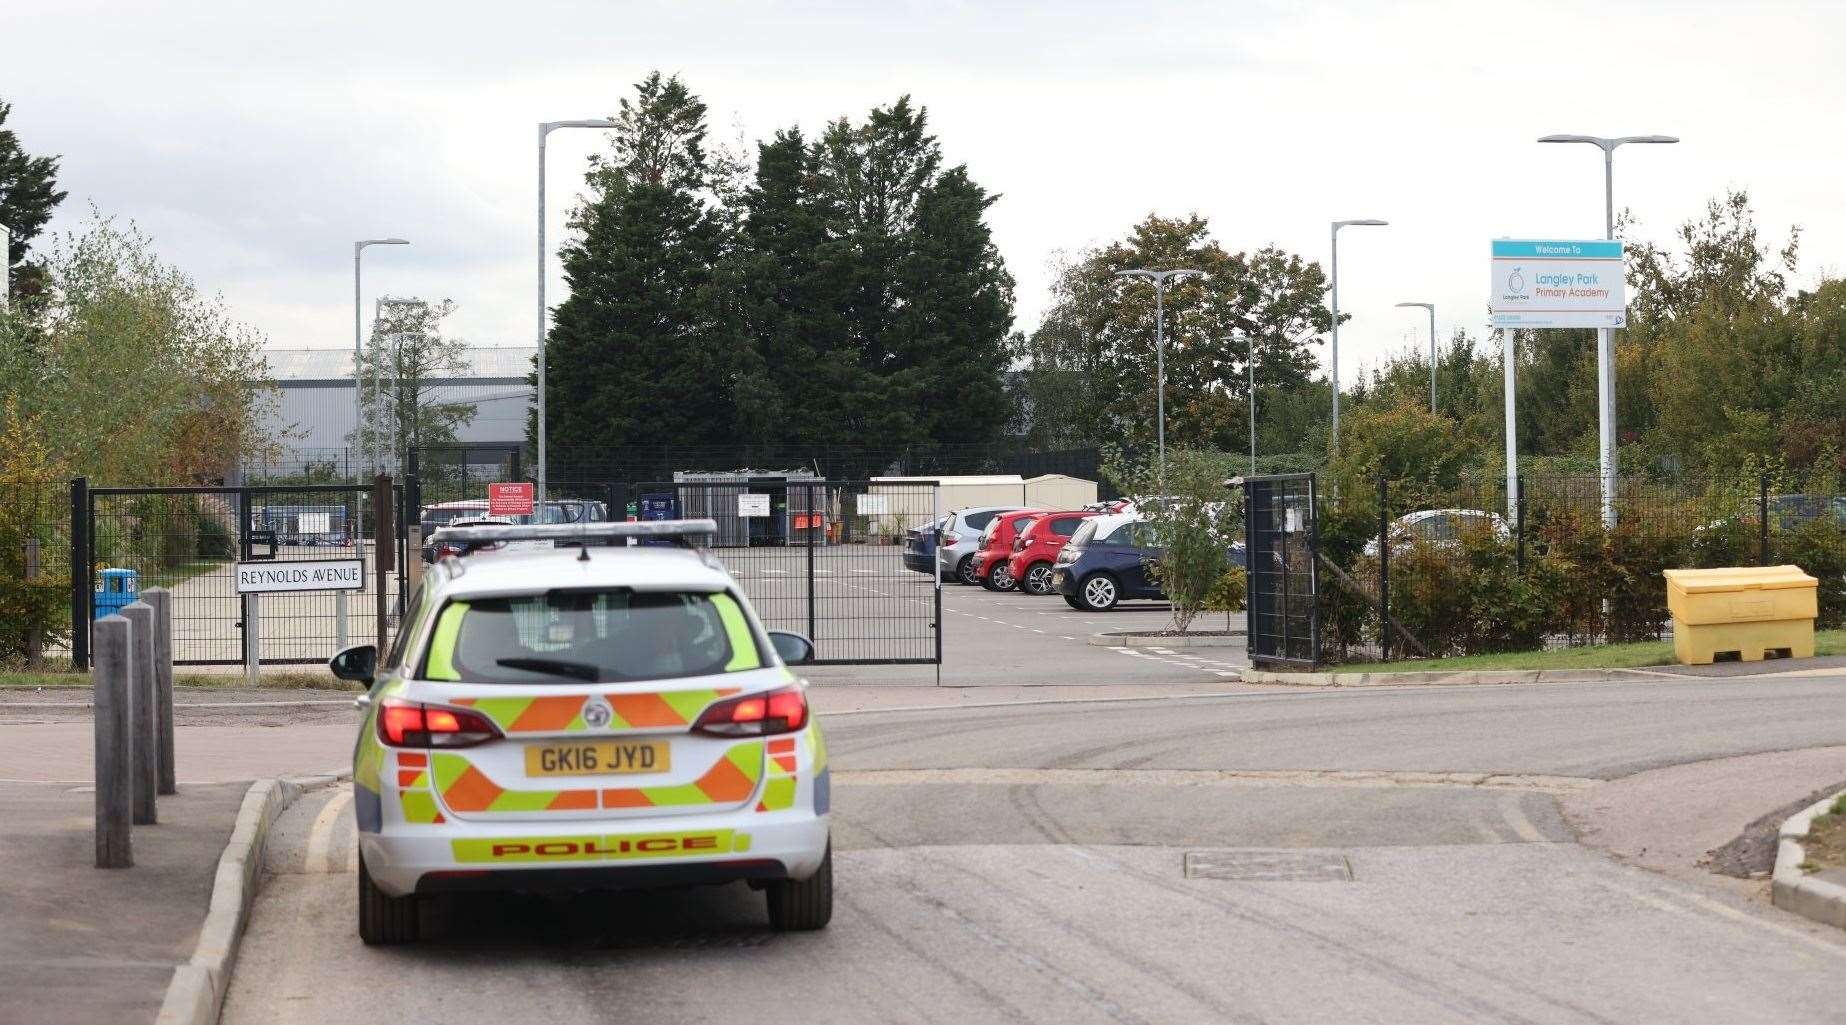 Police outside Langley Park Primary Academy in Maidstone. Picture: UKNIP